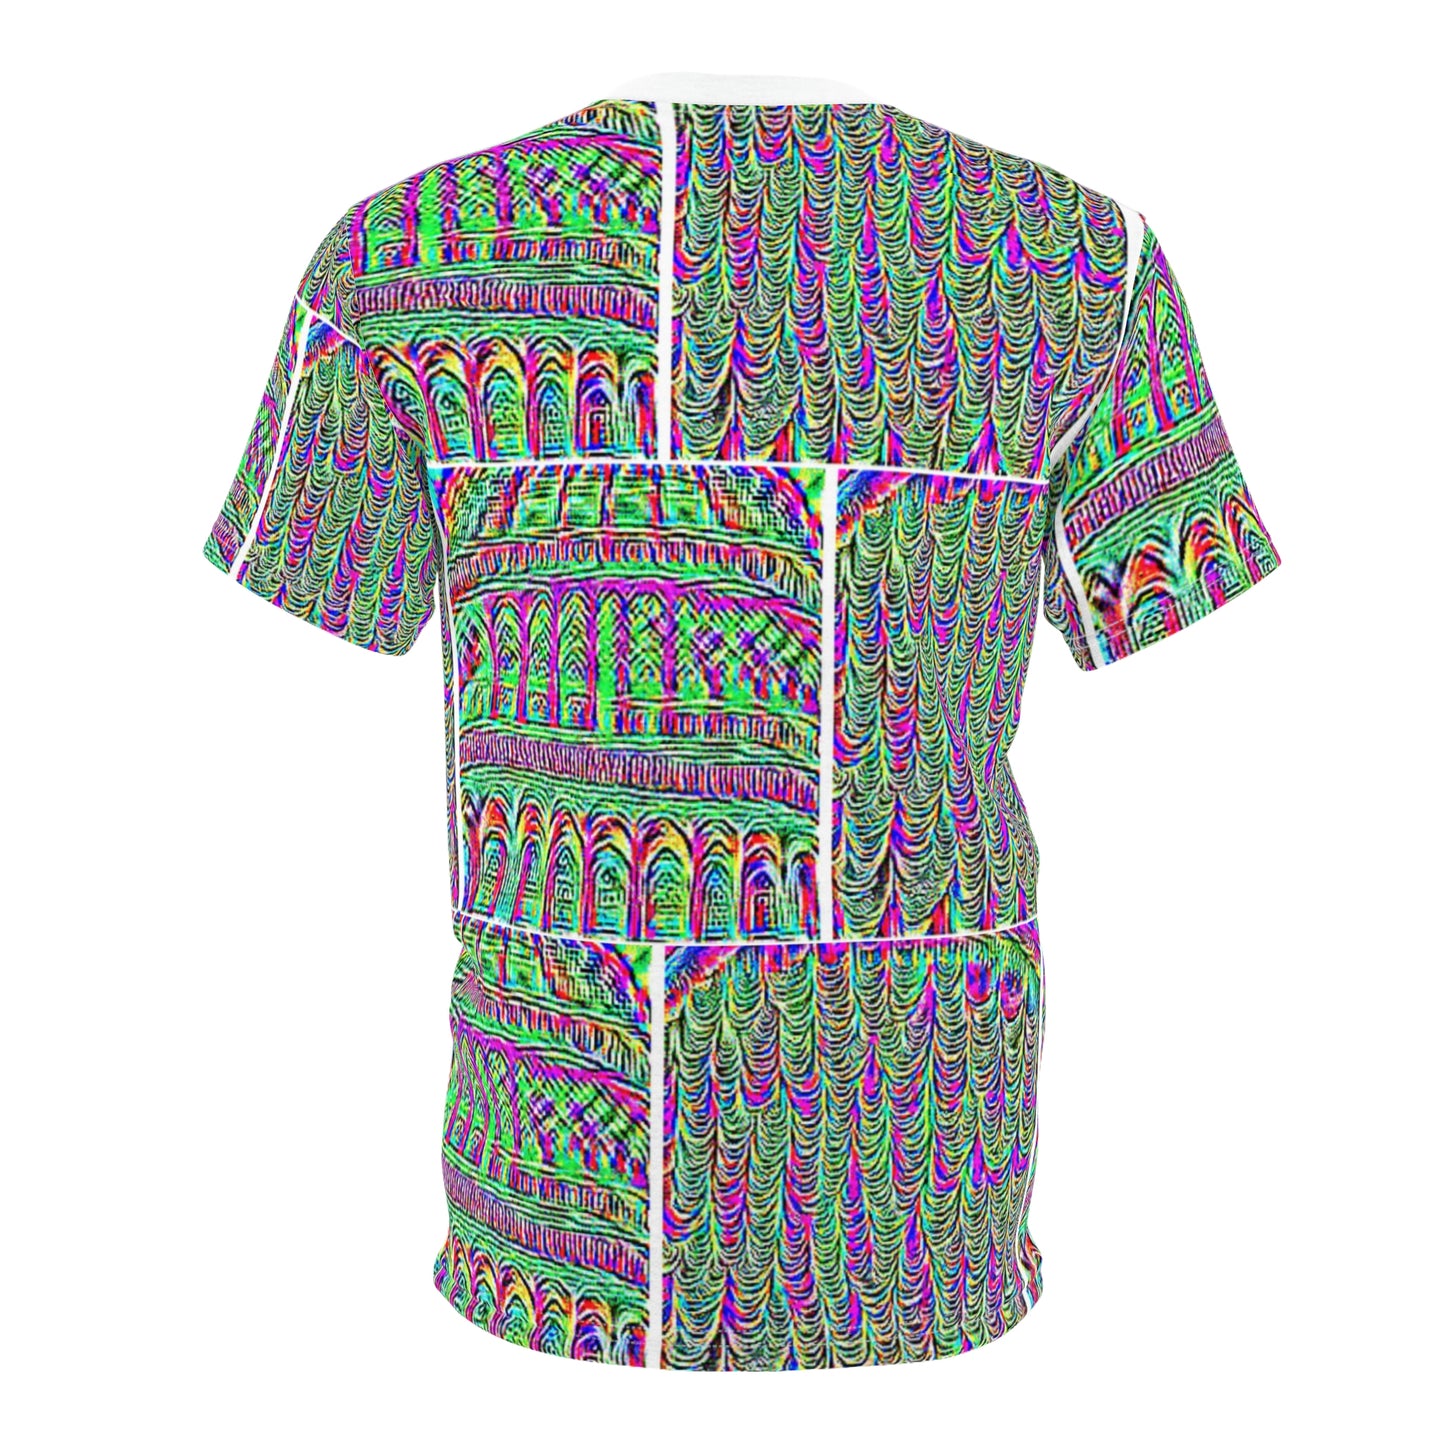 Anti Facial Recognition / AI Invisibility / Adversarial Pattern Unisex Tee